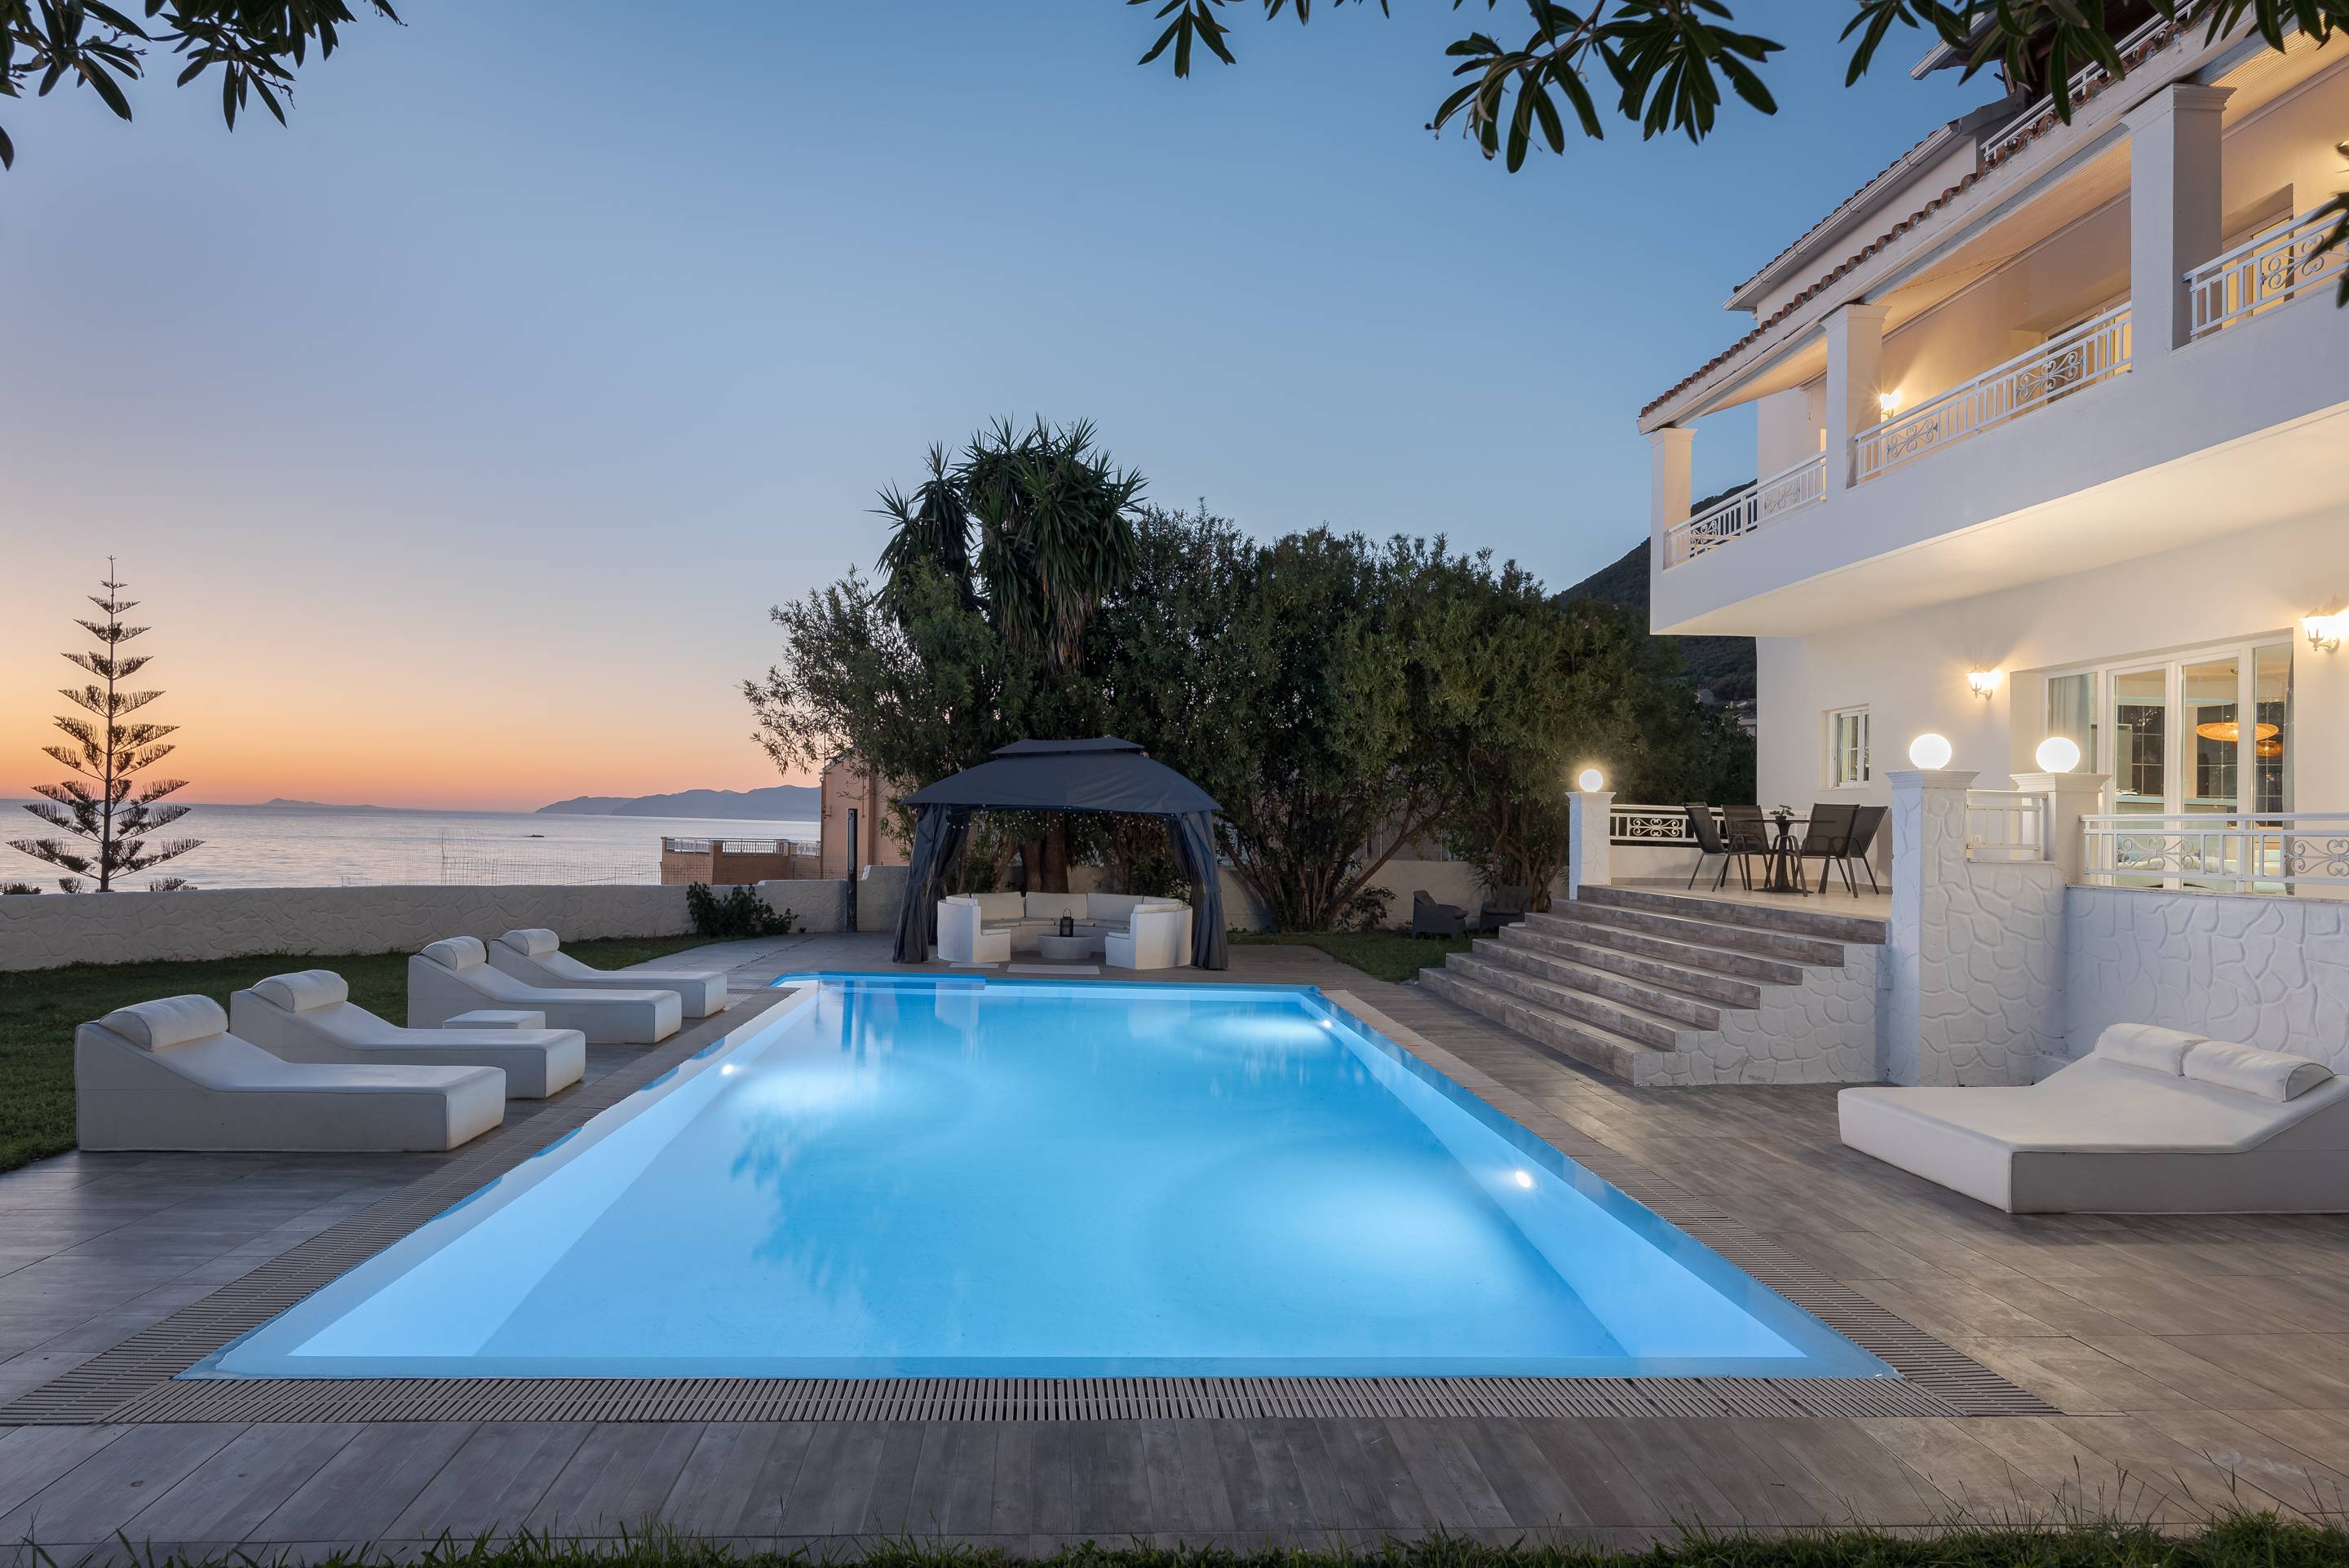 Magnificent seaviews from an Ultra Luxurious 480sqm Villa with a stunning pool in the picturesque Island of Corfu